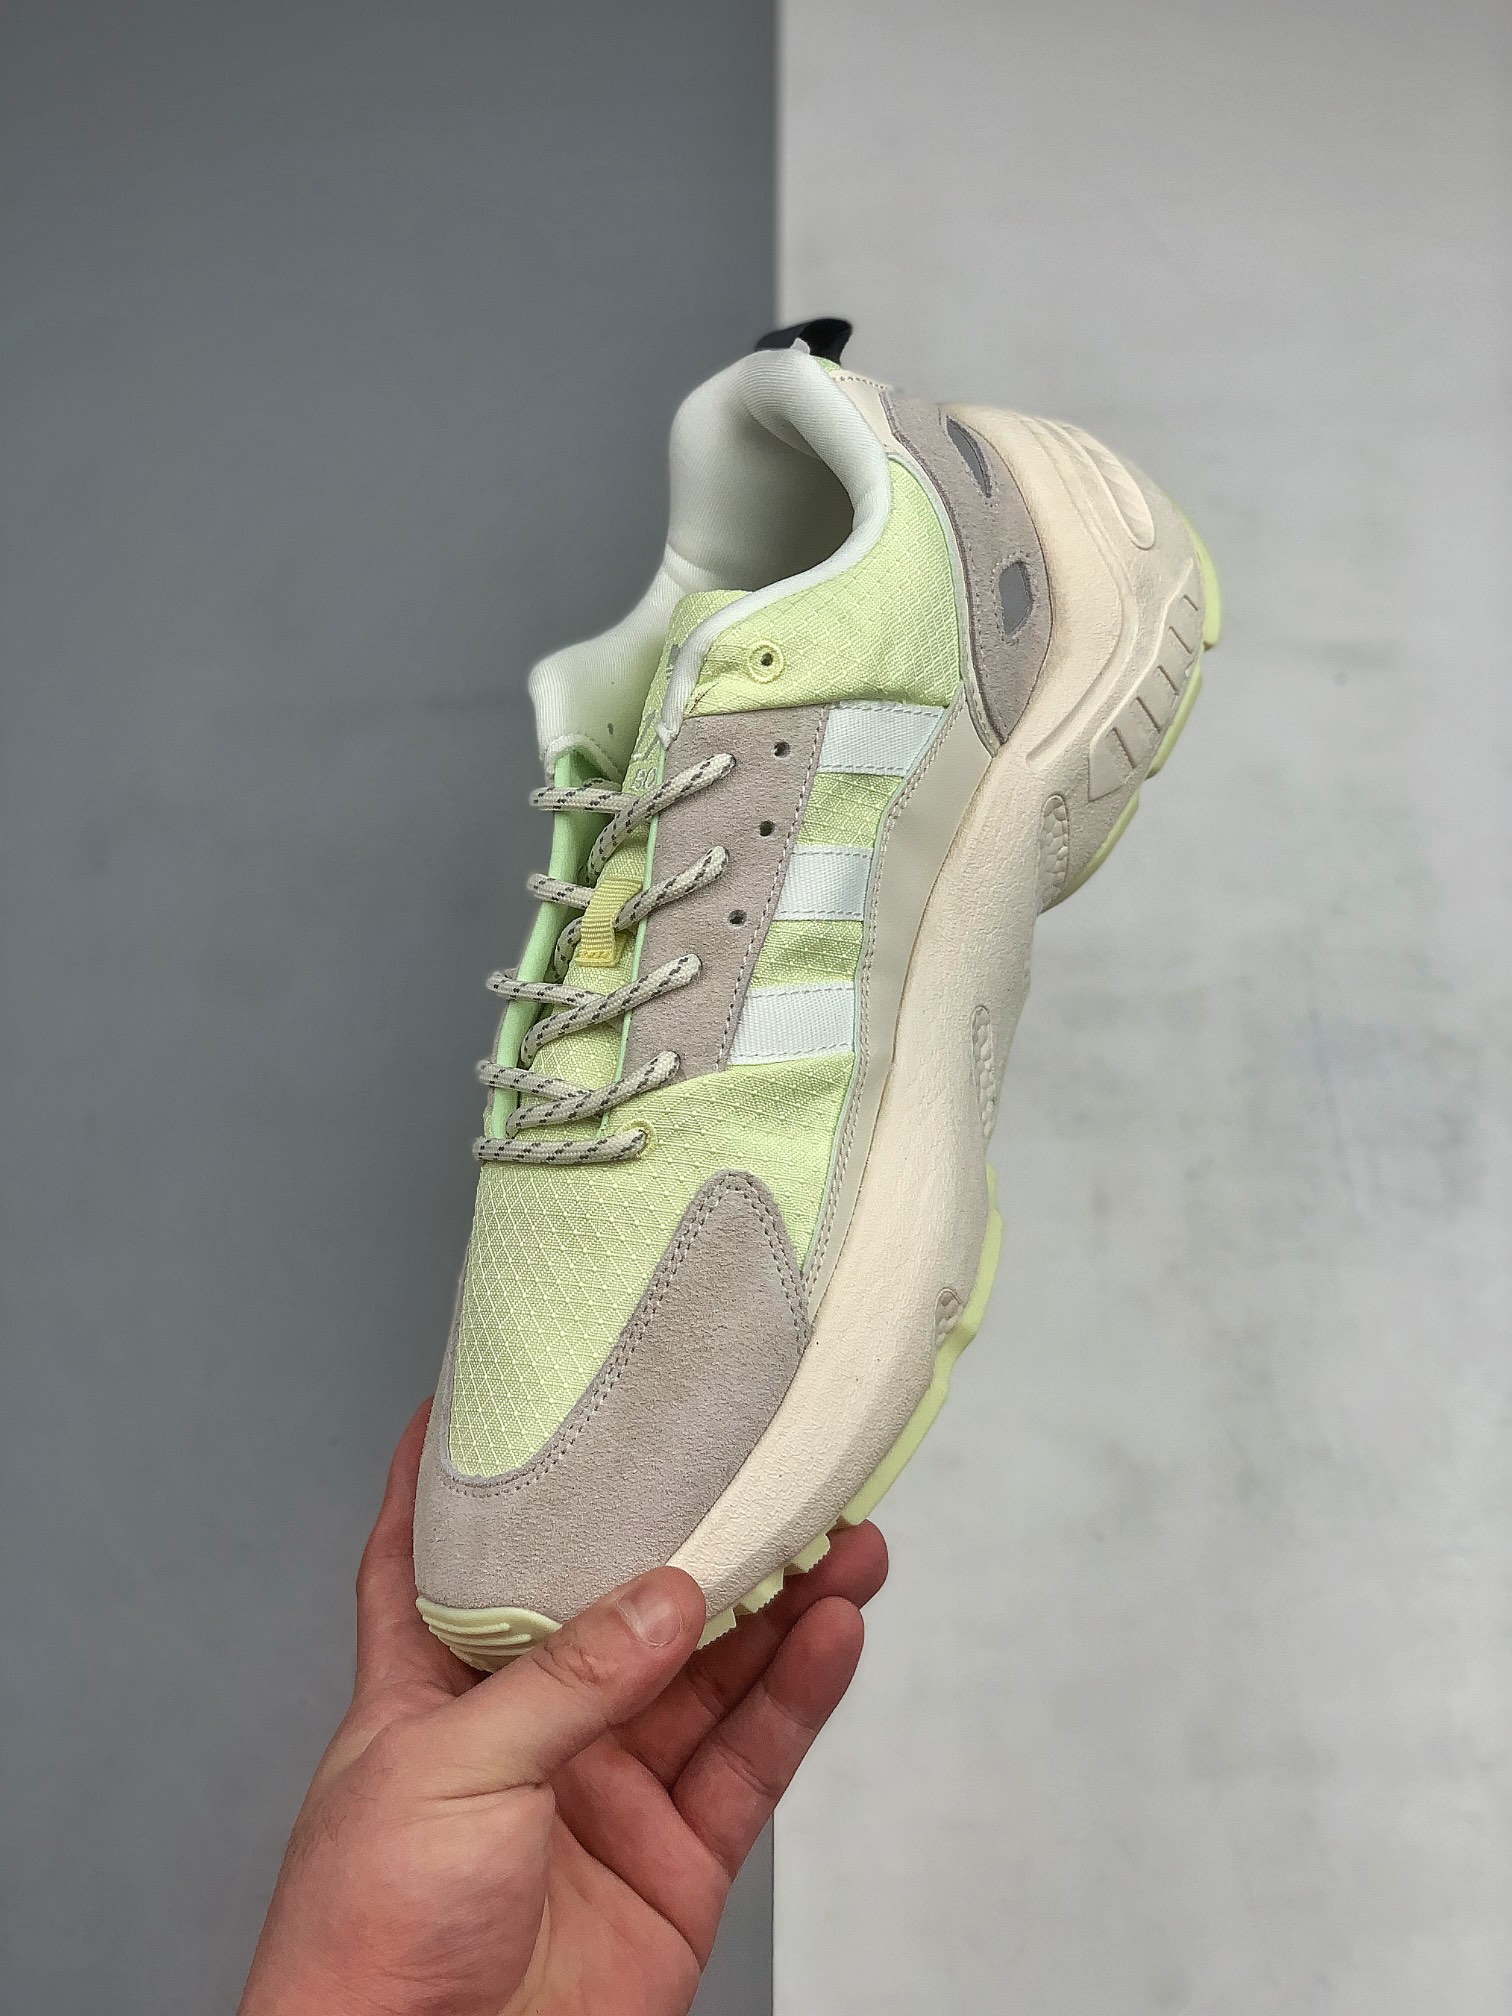 Adidas ZX 22 Boost Sand Yellow Tint GY5271 - Stylish and Comfortable Sneakers